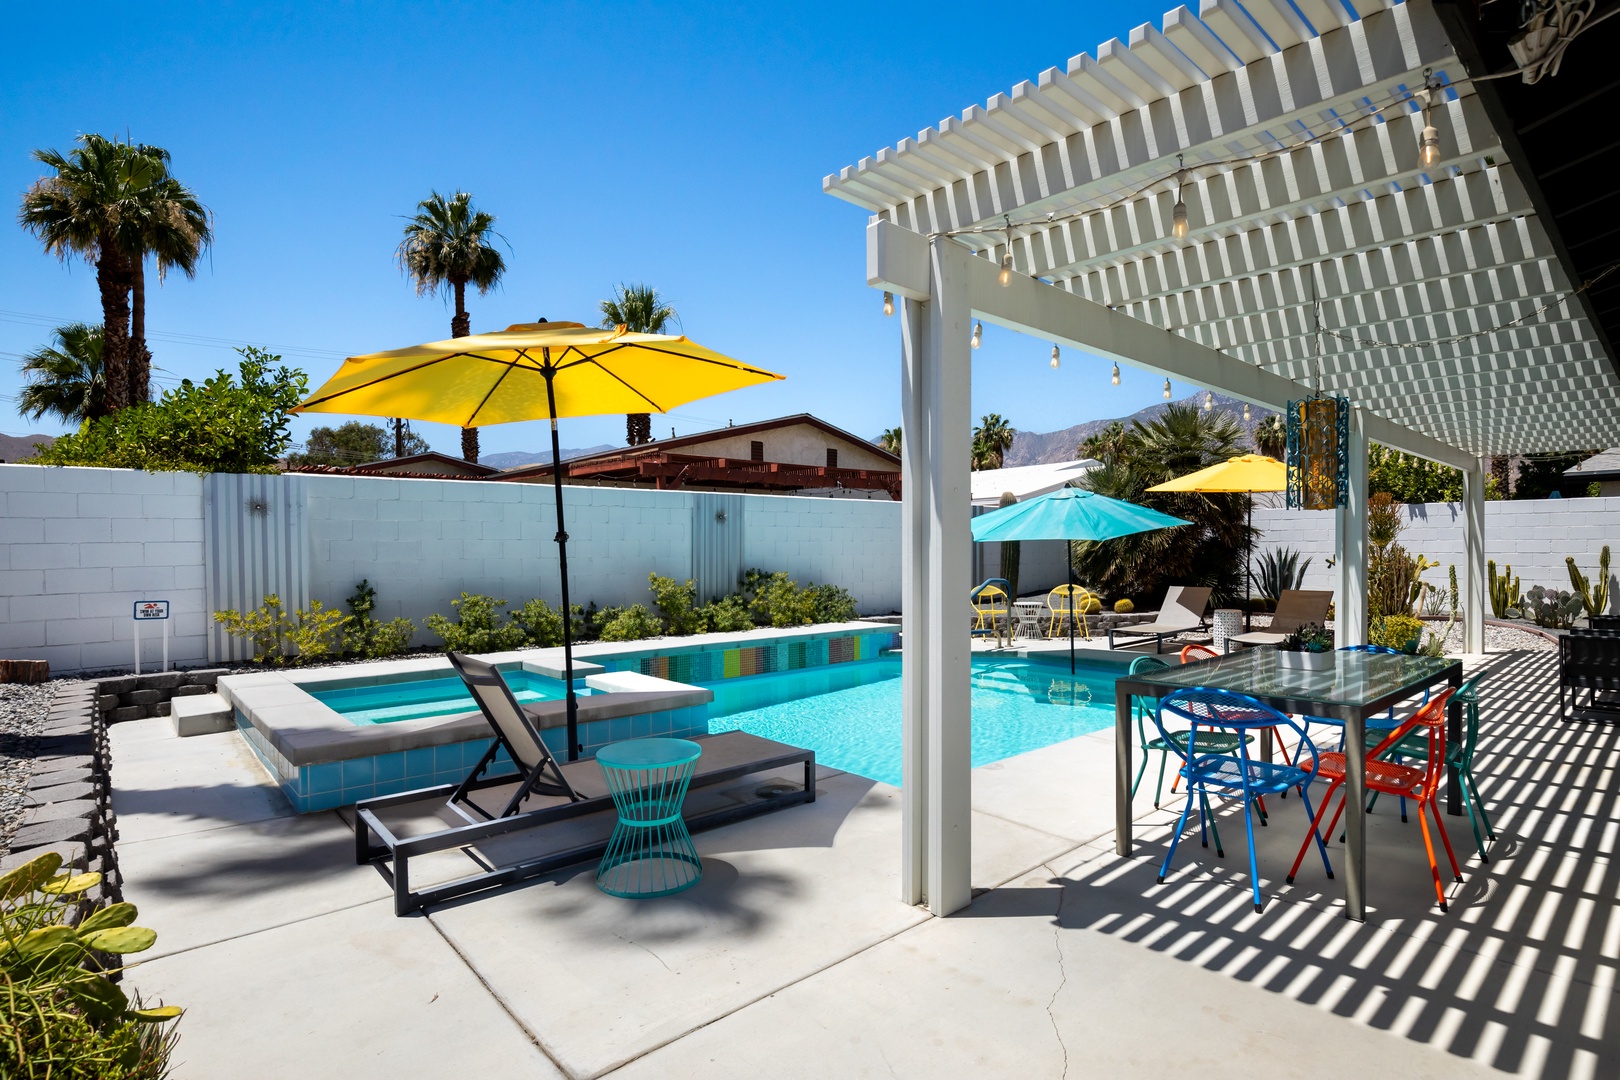 Poolside relaxation awaits, with comfortable lounge chairs for tanning